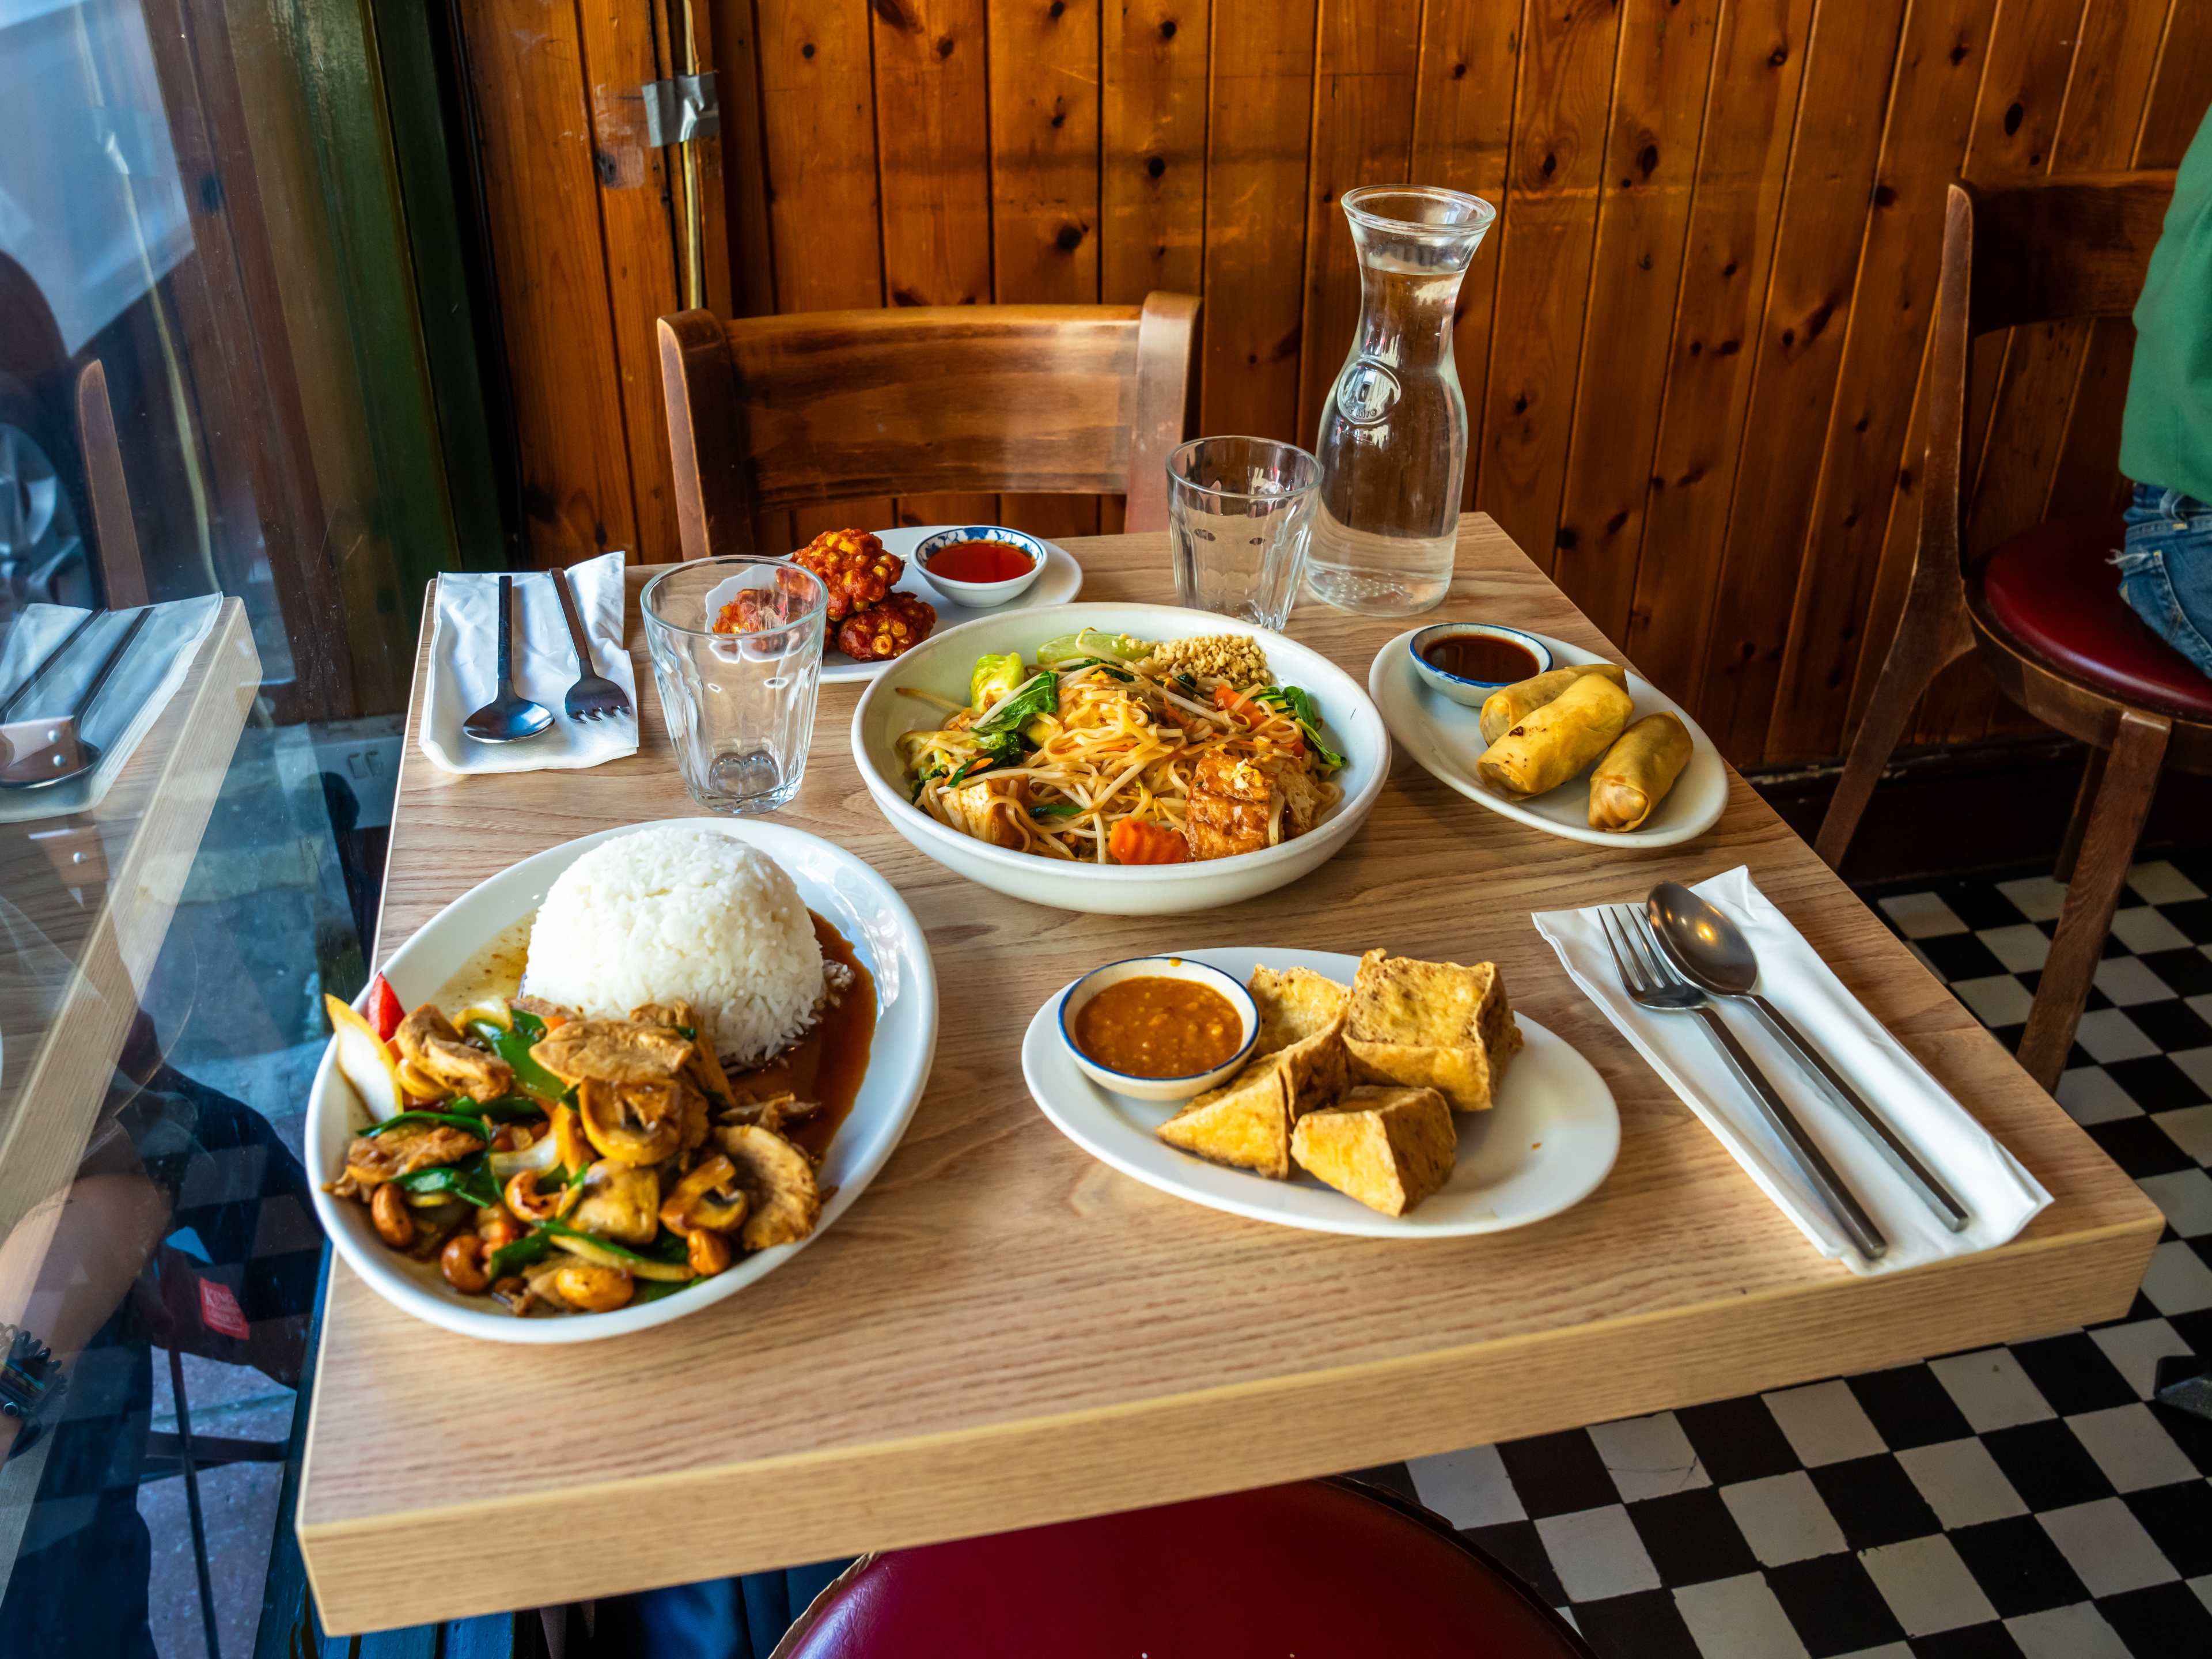 A spread of dishes from Paolina Thai.